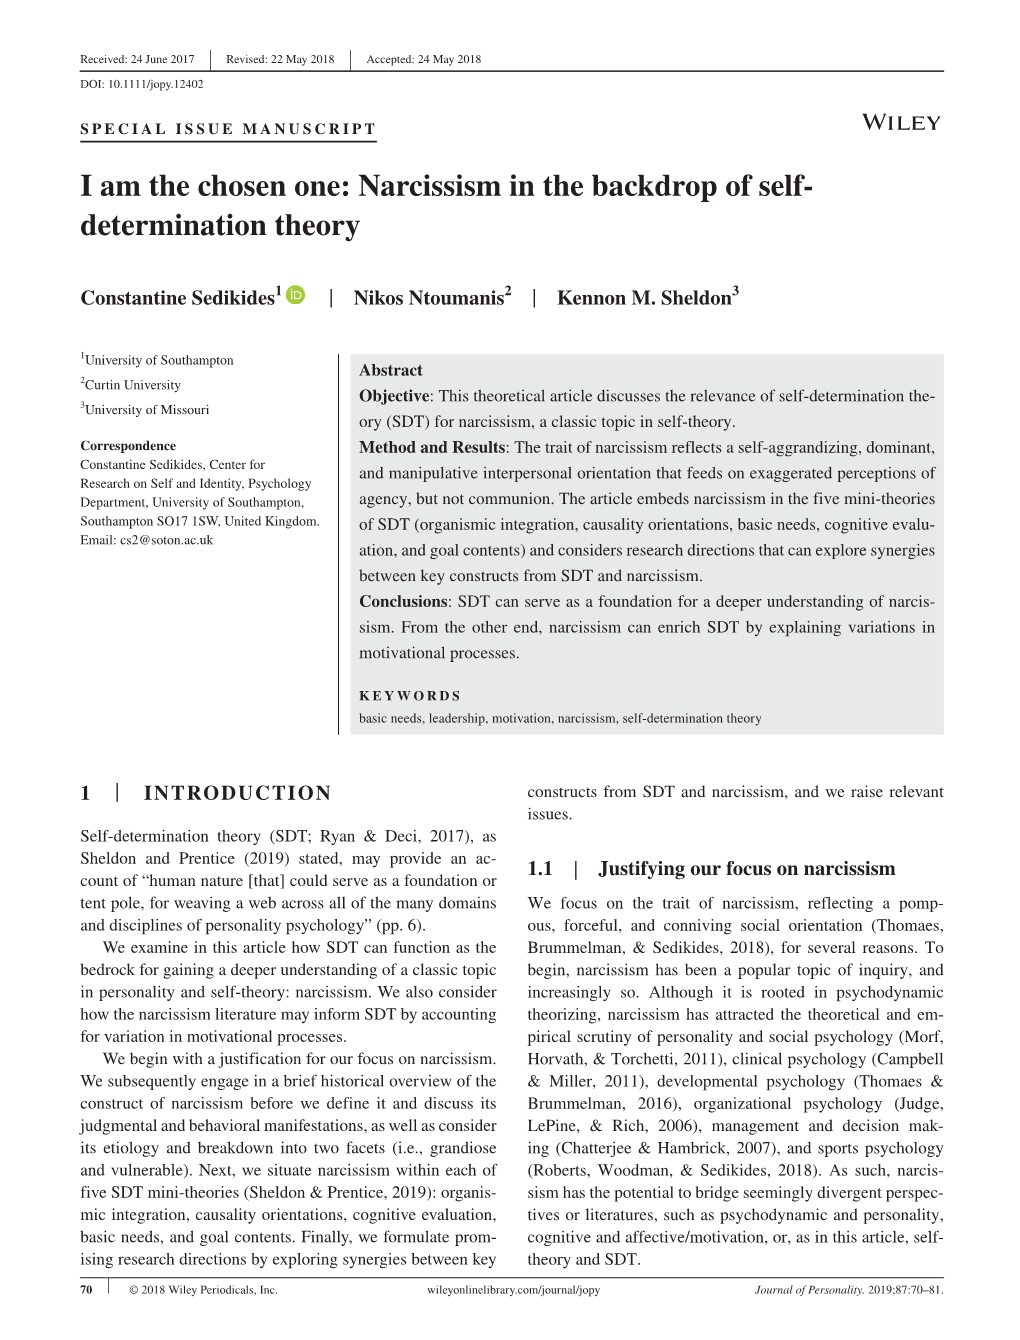 I Am the Chosen One: Narcissism in the Backdrop of Self‐Determination